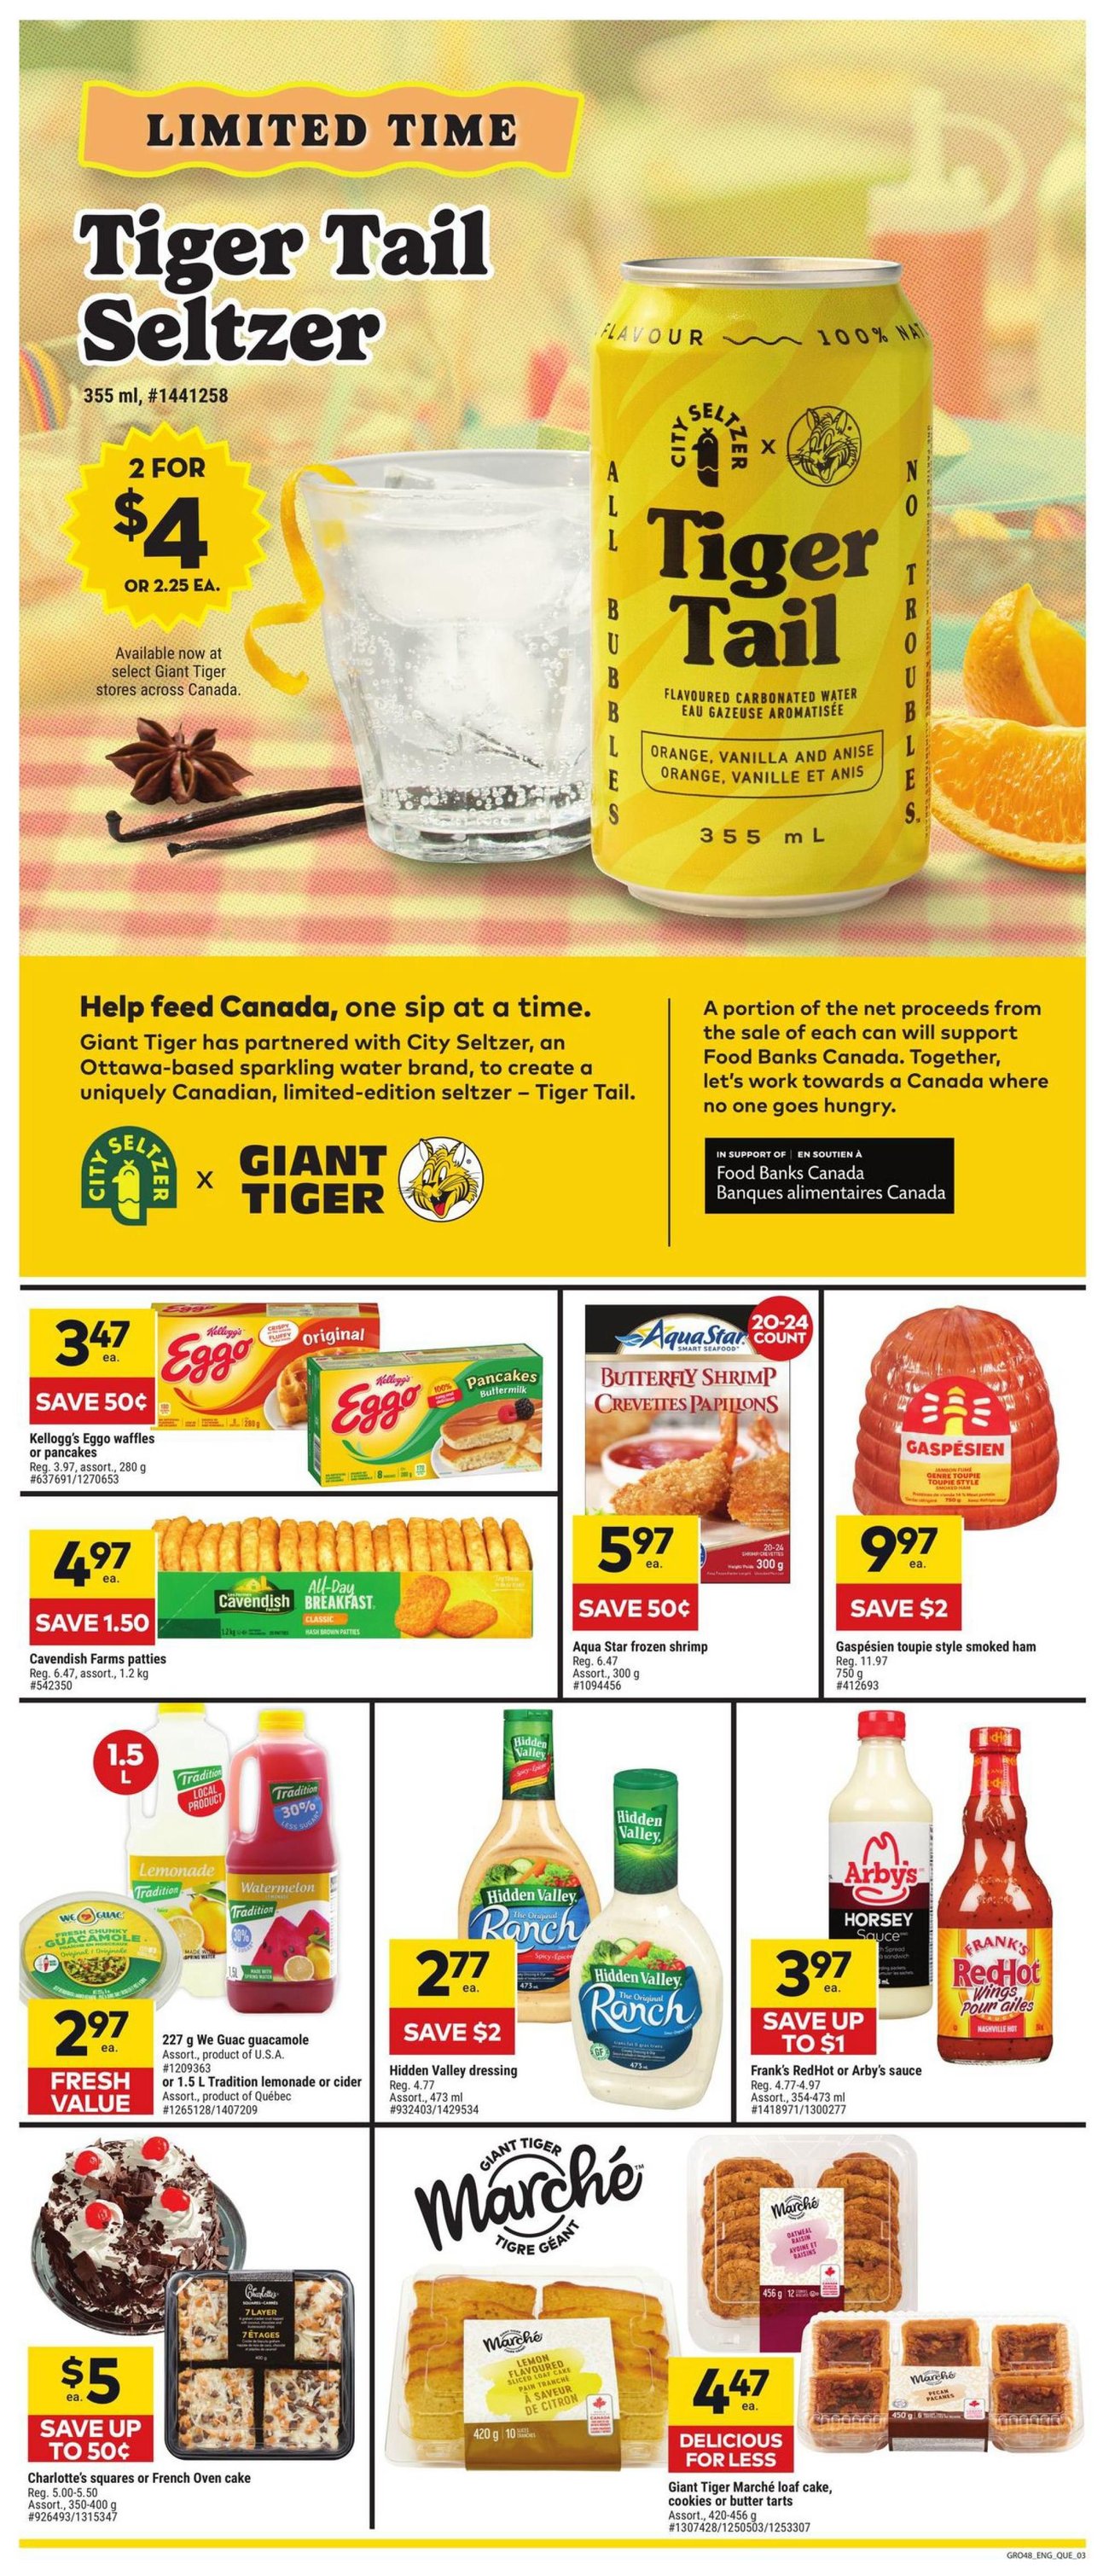 Giant Tiger - Quebec - Weekly Flyer Specials - Page 4